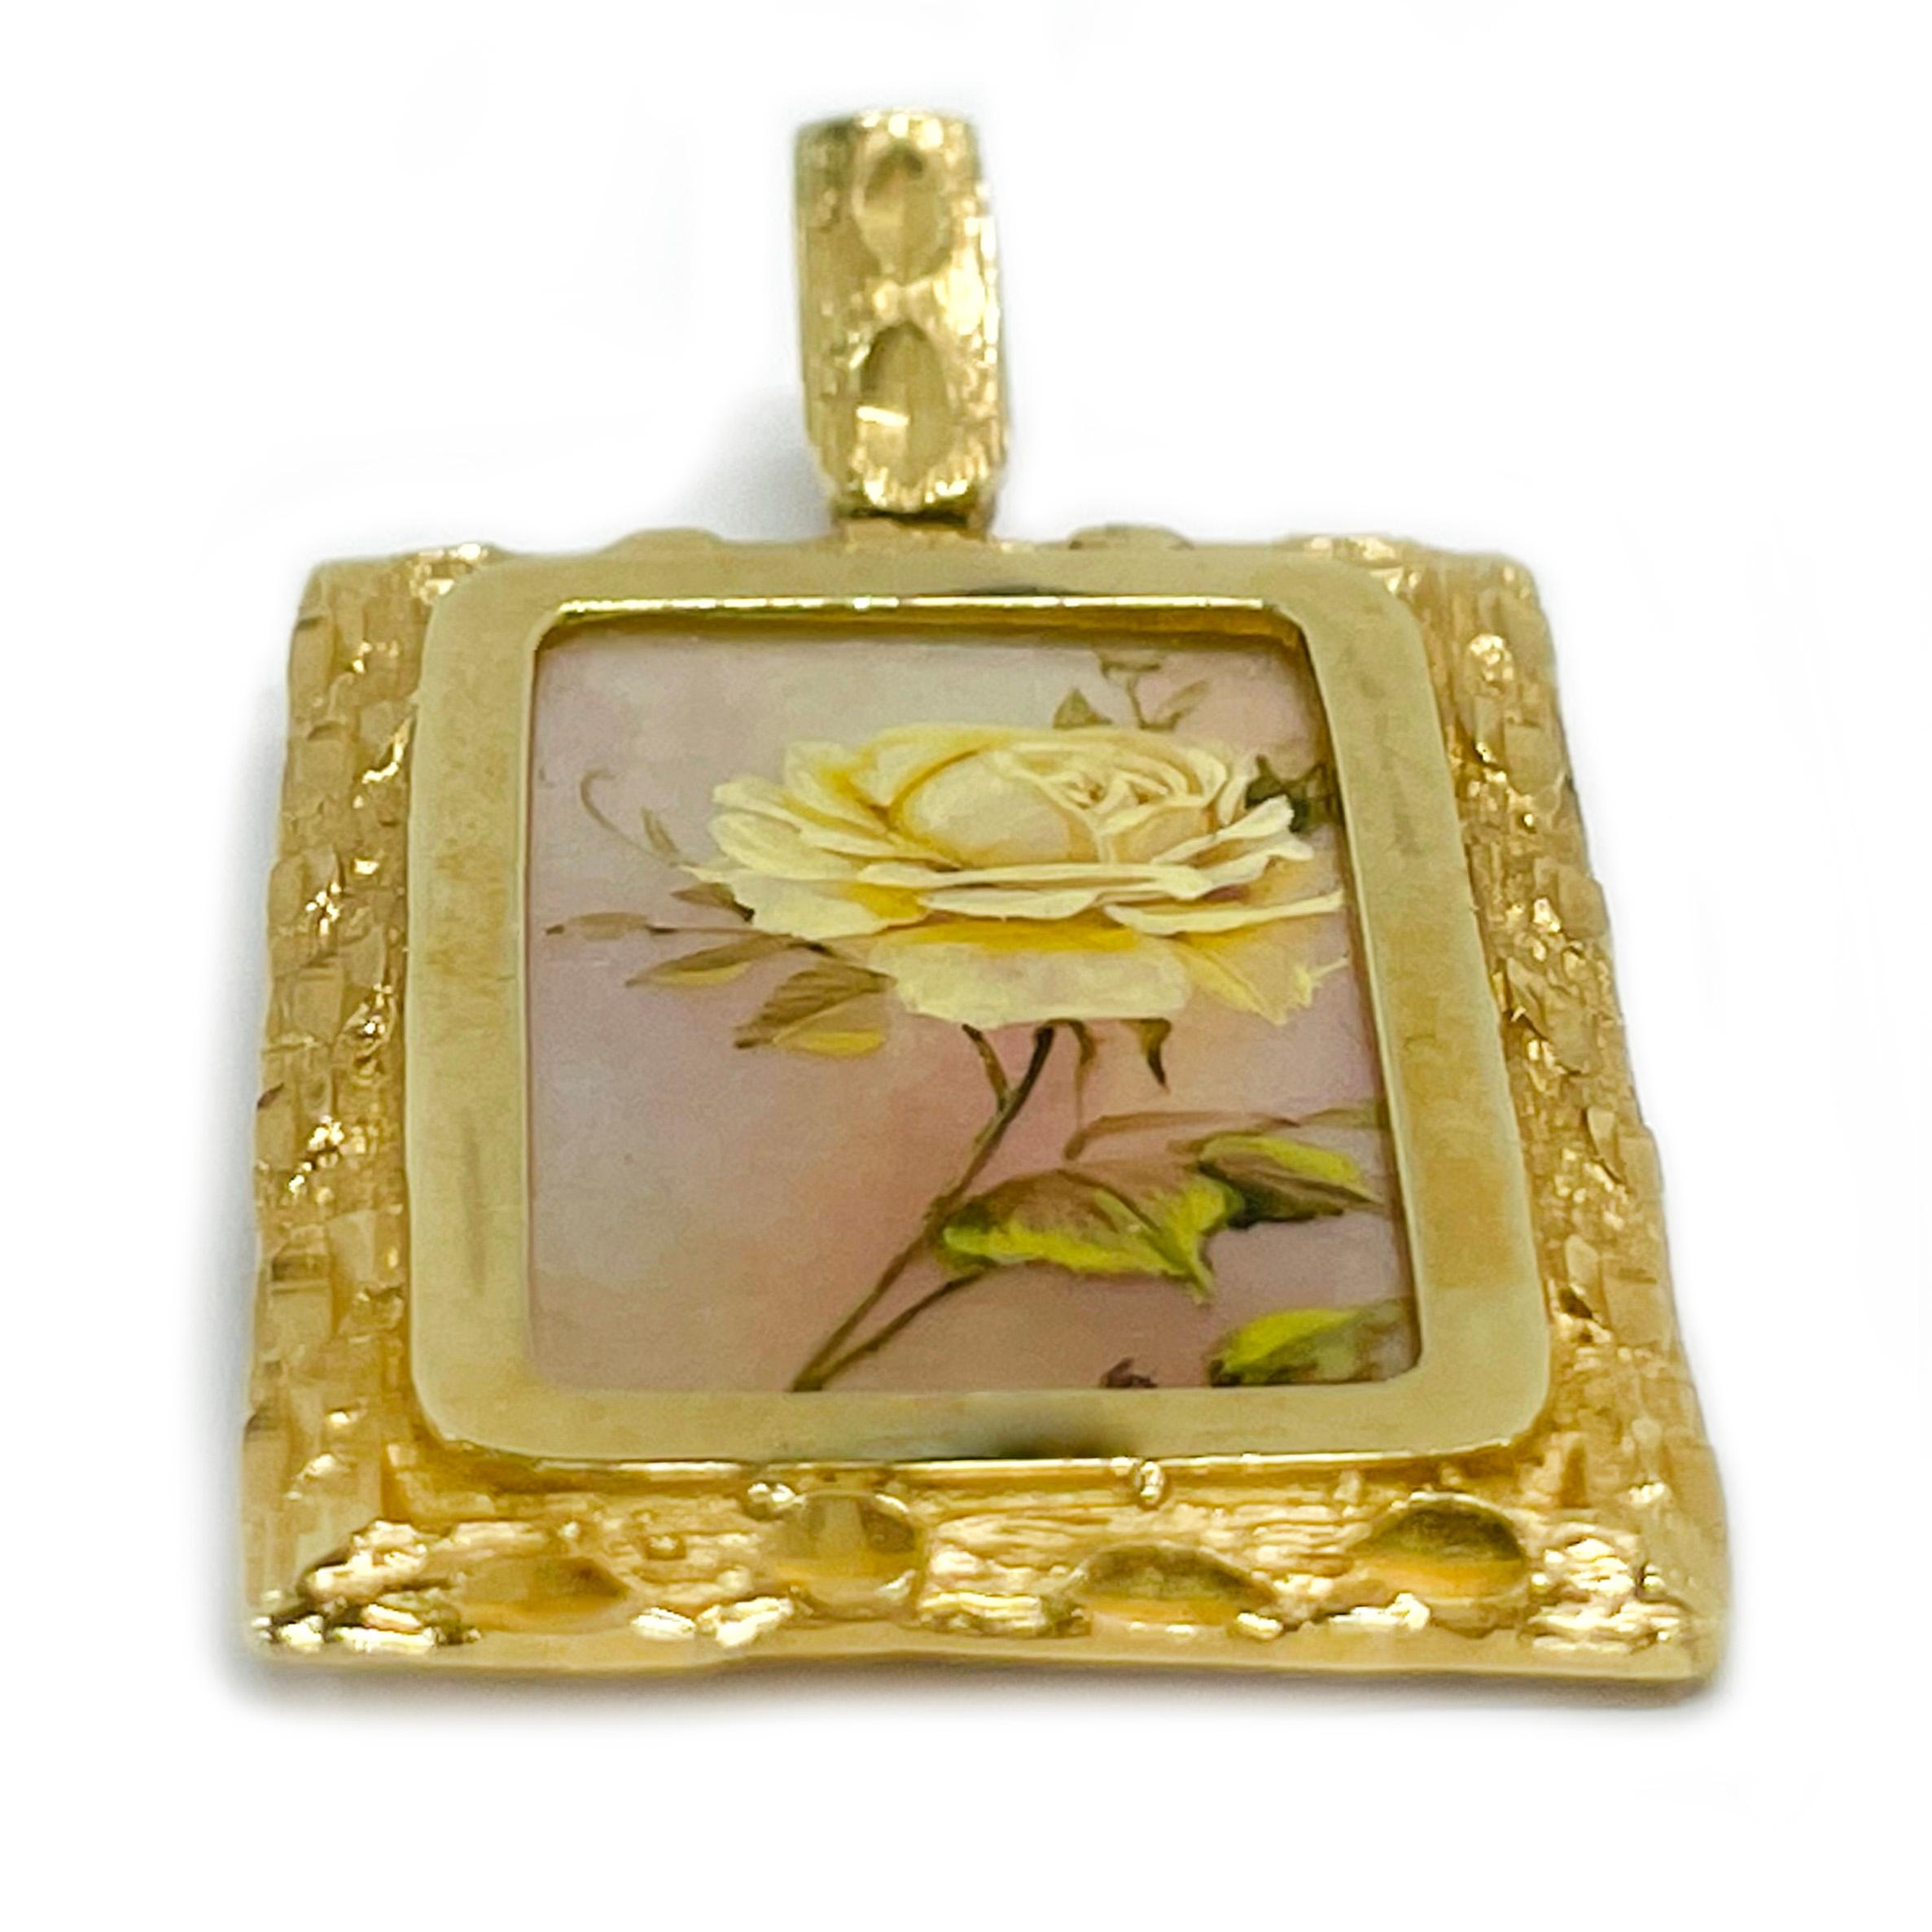 14 Karat Yellow Gold Hand Painted Yellow Rose on Mother of Pearl Pendant. Absolutely lovely Yellow Rose with Pink Background painting. The miniature painting is set in a 14 karat gold rectangular frame with diamond-cut details. The painting is